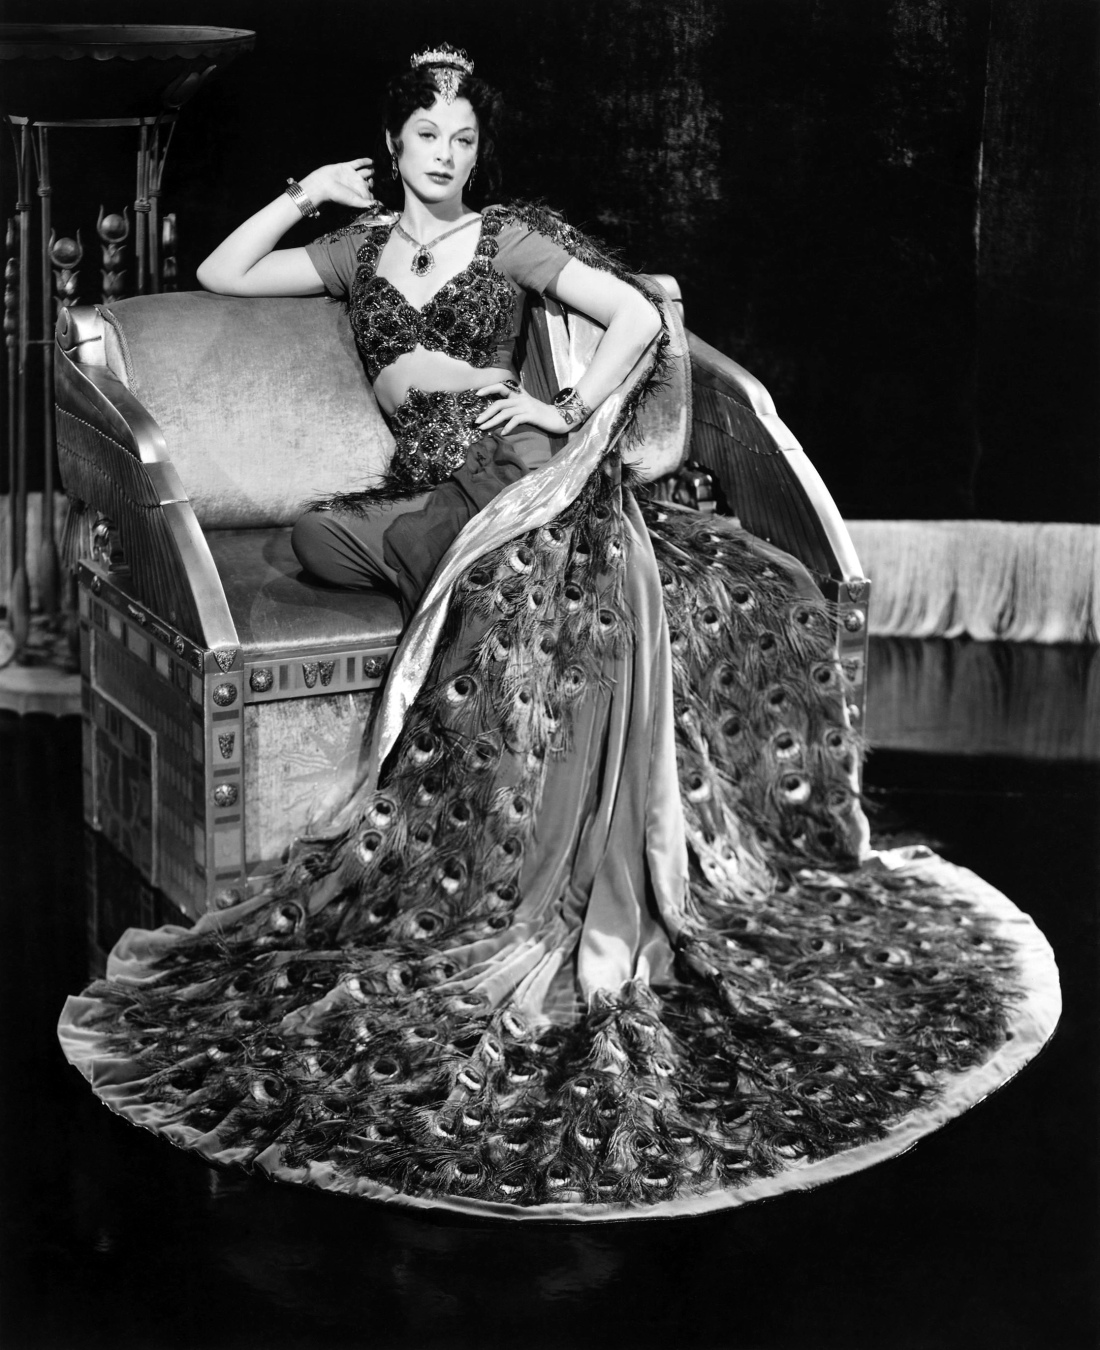 Hey There Delilah, Hedy Lamarr decked out as the vixen from the Opera Samson and Delilah